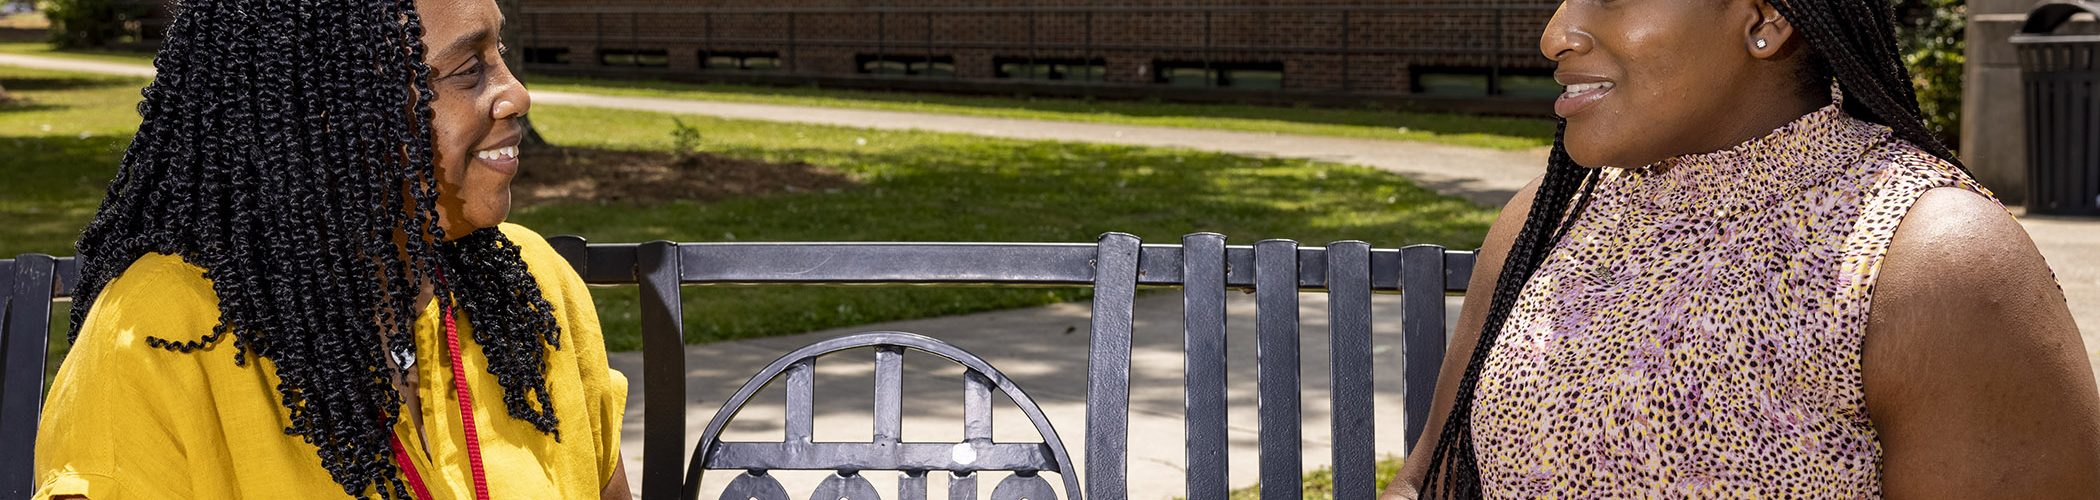 student and counselor sitting on bench outside high school